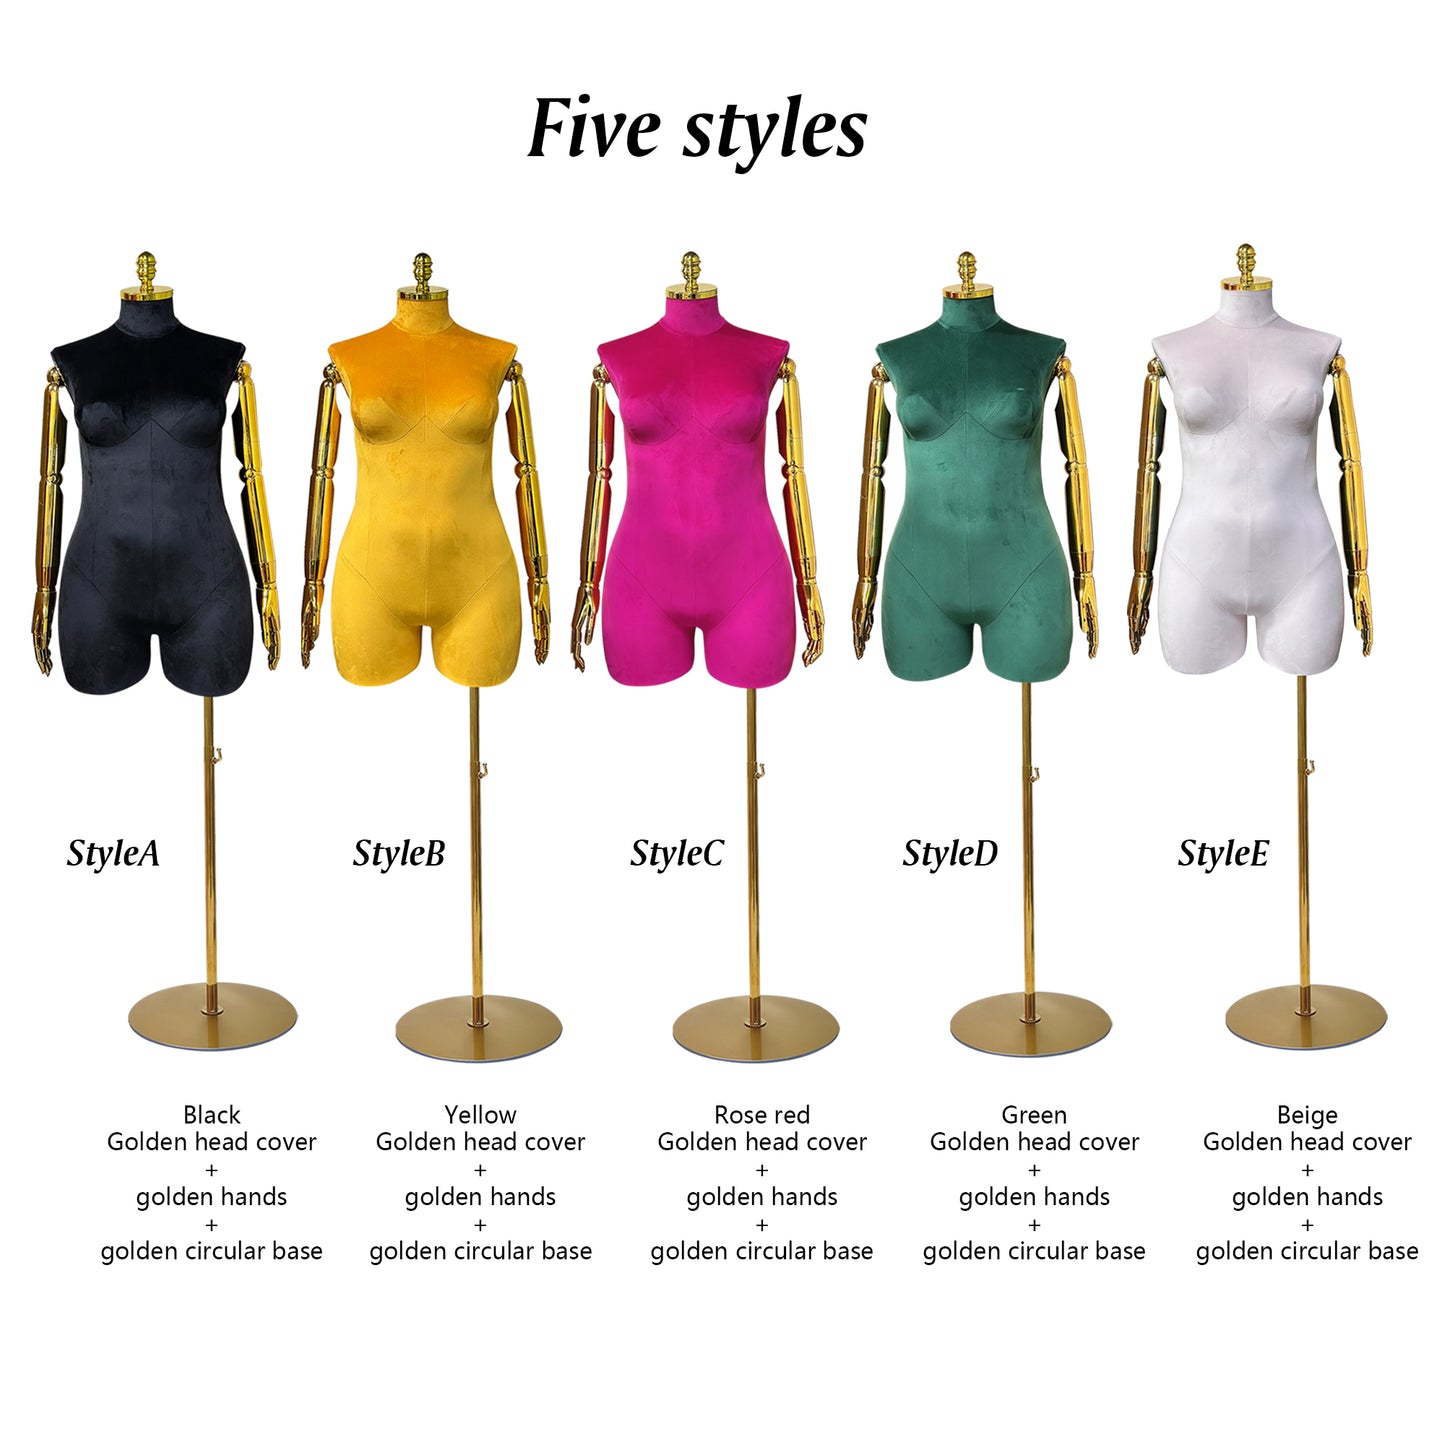 Jelimate Luxury Plus Size Female Mannequin Torso With Gold Arms,Half Body Women Dress Form Velvet Display Mannequin,Plus Size Dress Form Model JM375